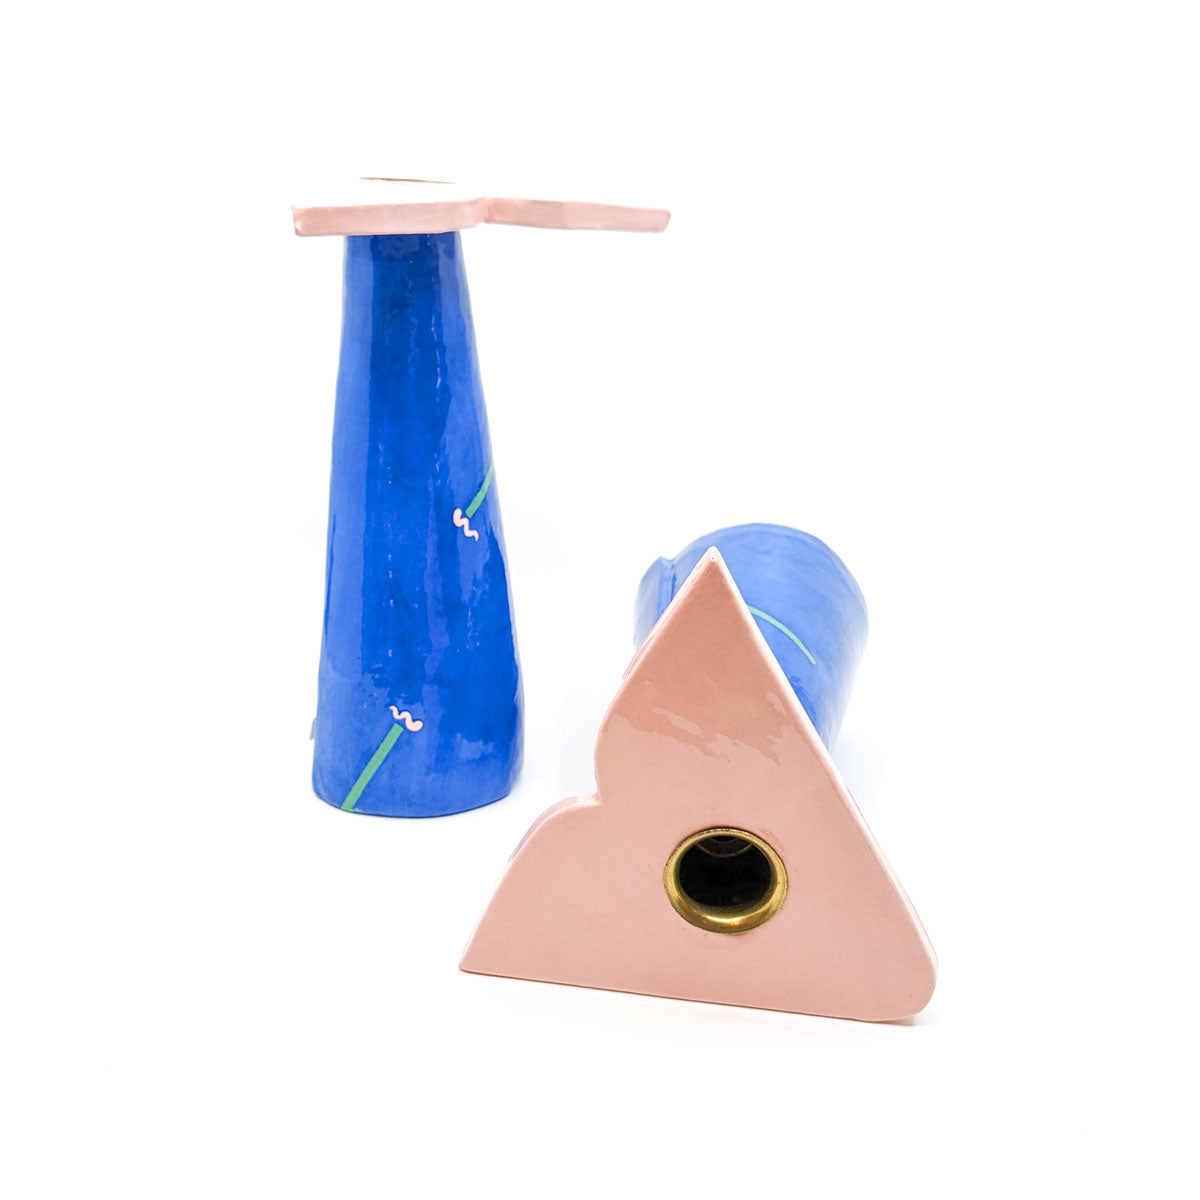 Candle Stick Holders in Dark Blue